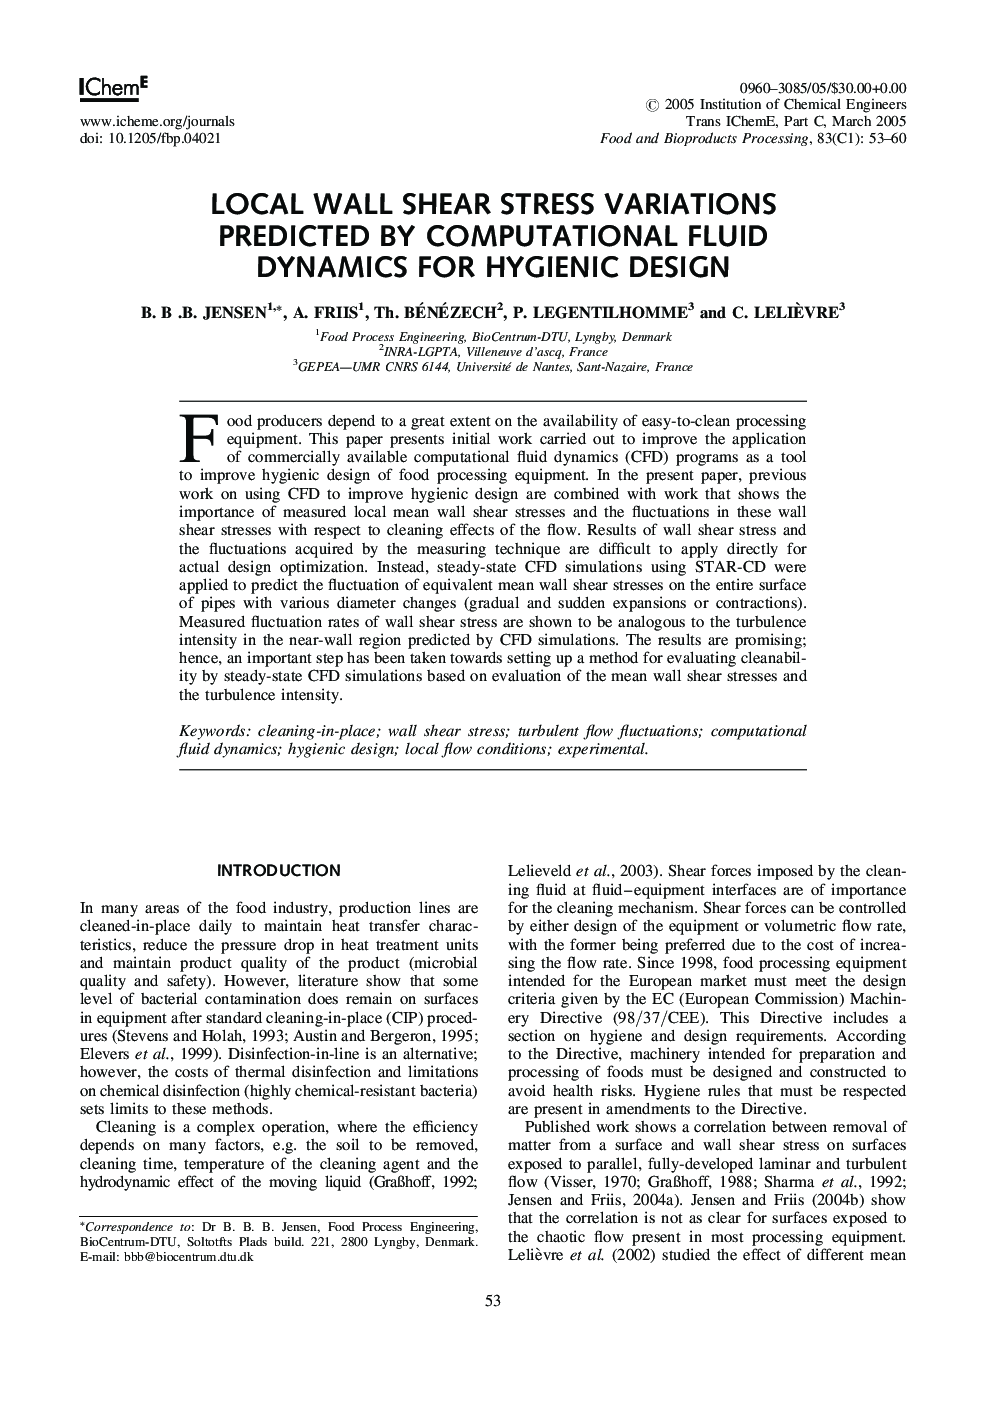 Local Wall Shear Stress Variations Predicted by Computational Fluid Dynamics for Hygienic Design